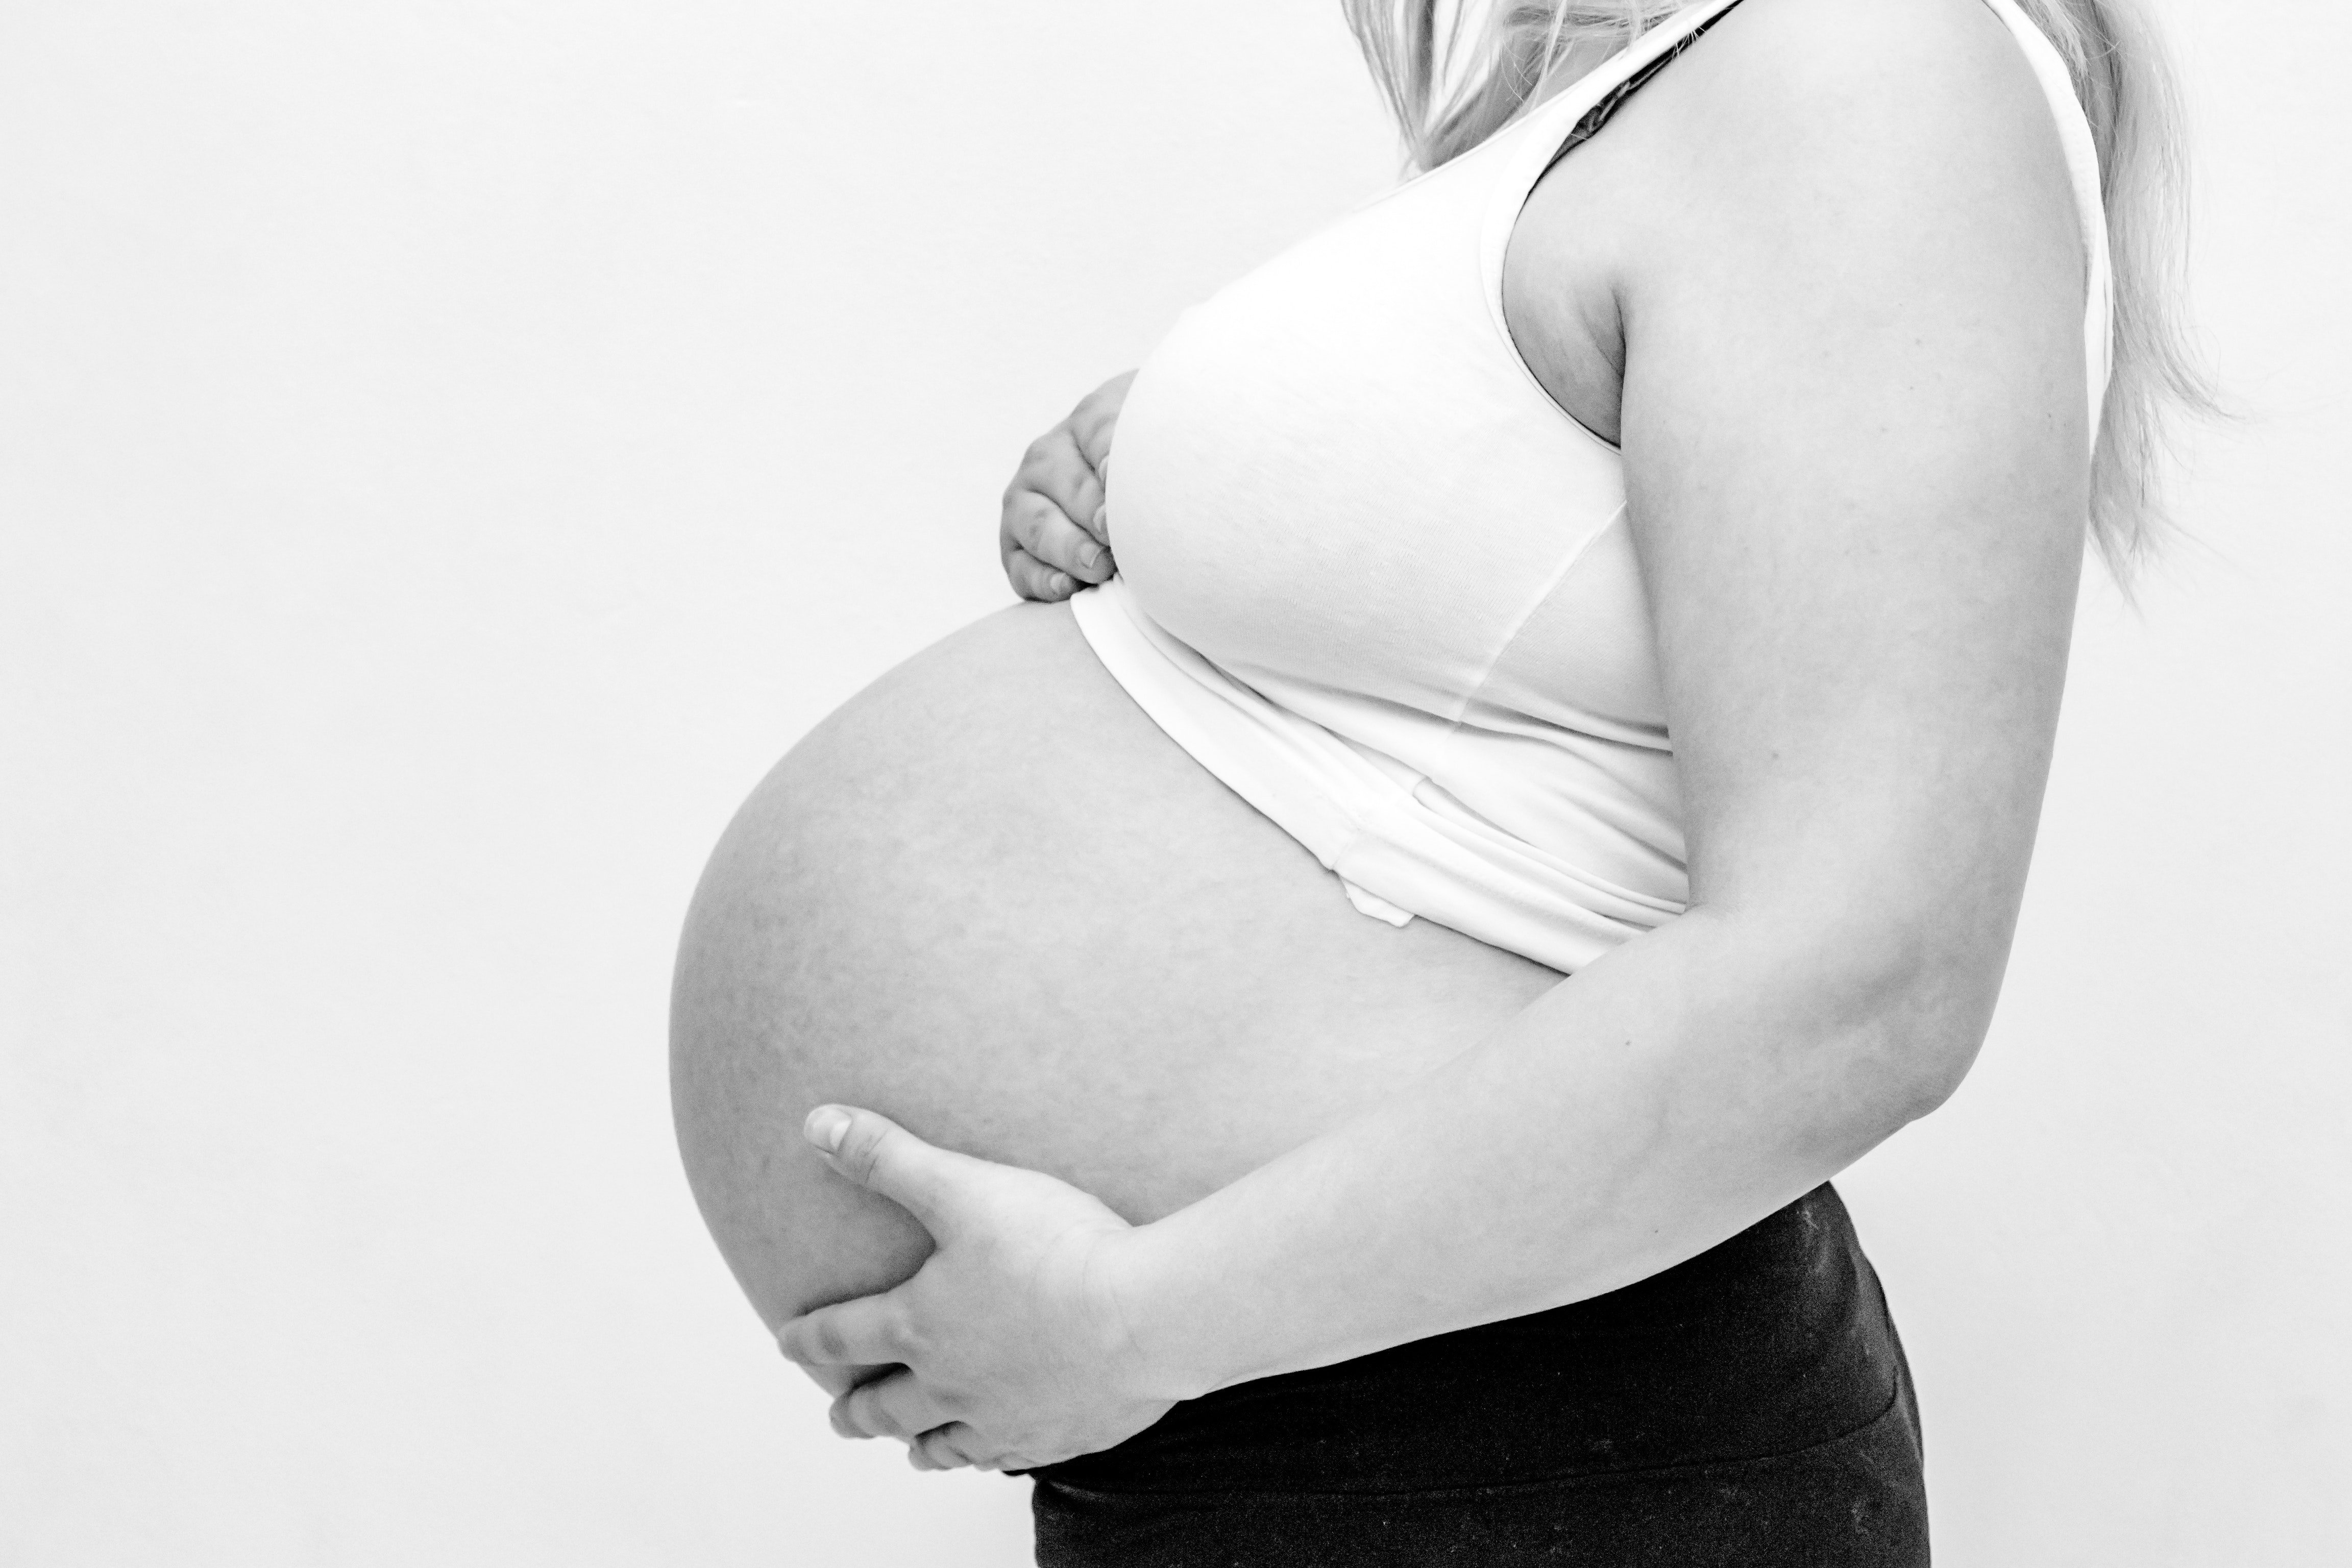 Image of a pregnant woman showing her belly. | Source: Pexels